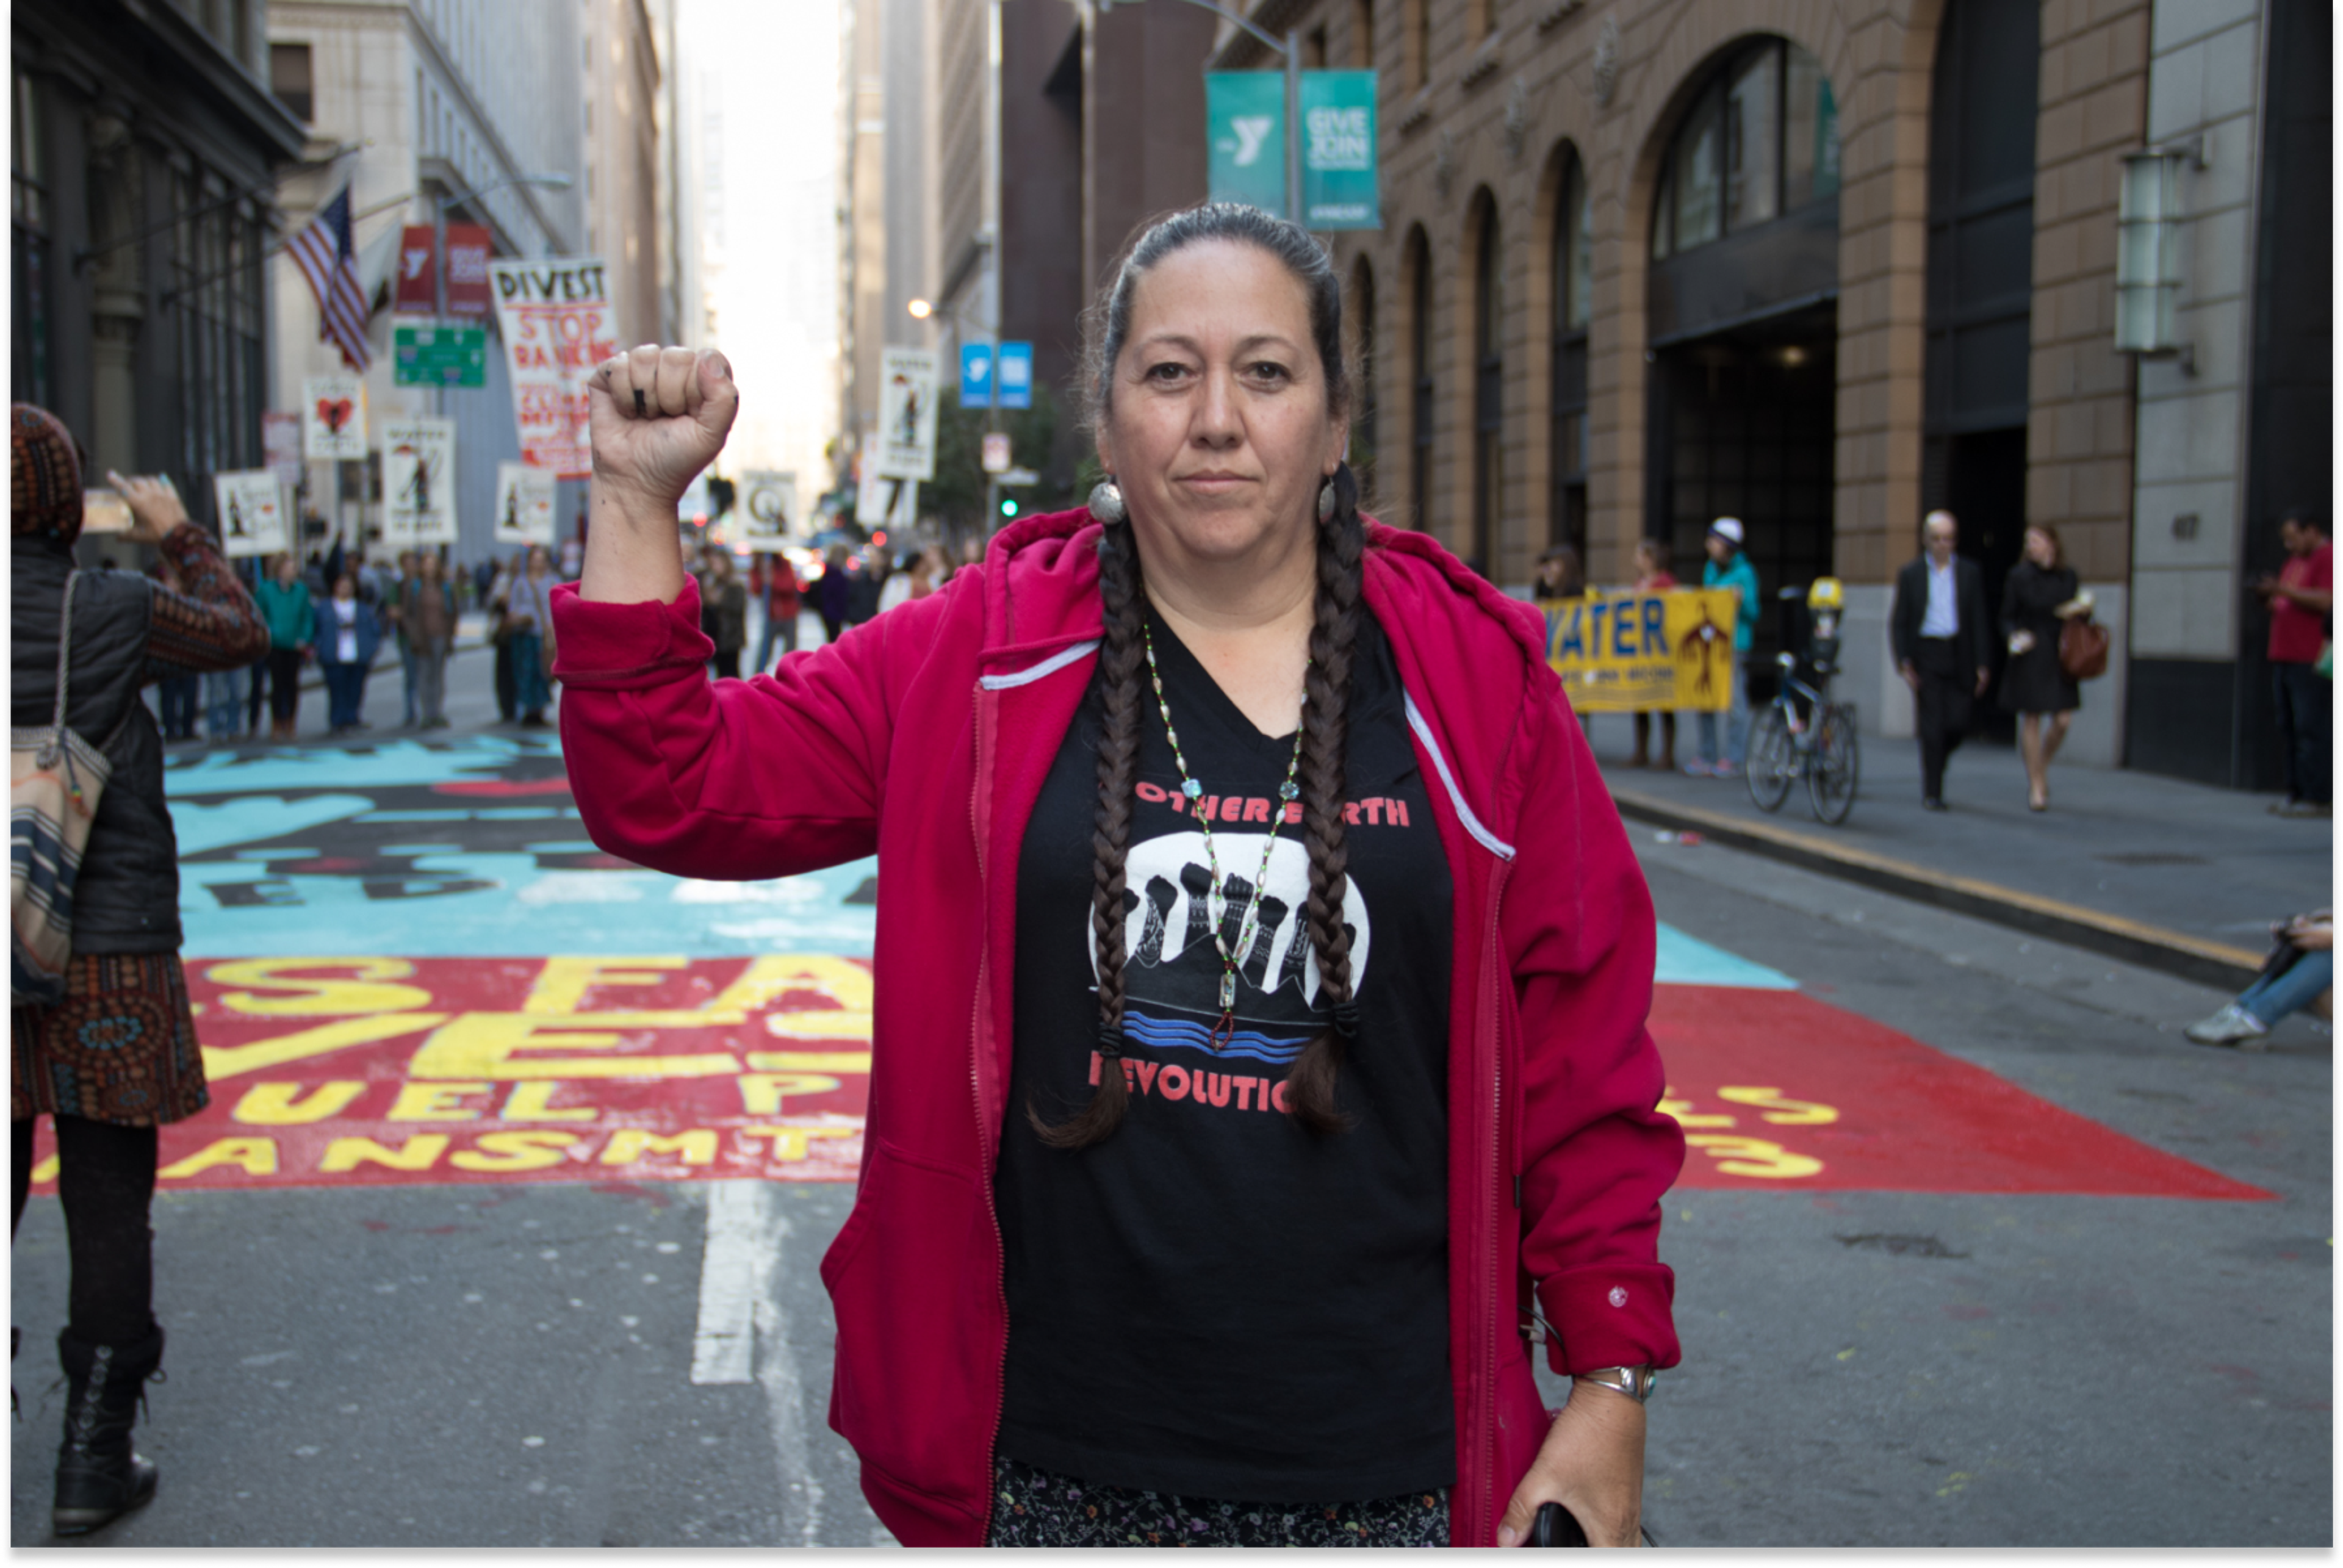 Image of Christi Belcourt in a red sweater in the street during a protest with her arm raised in a fist